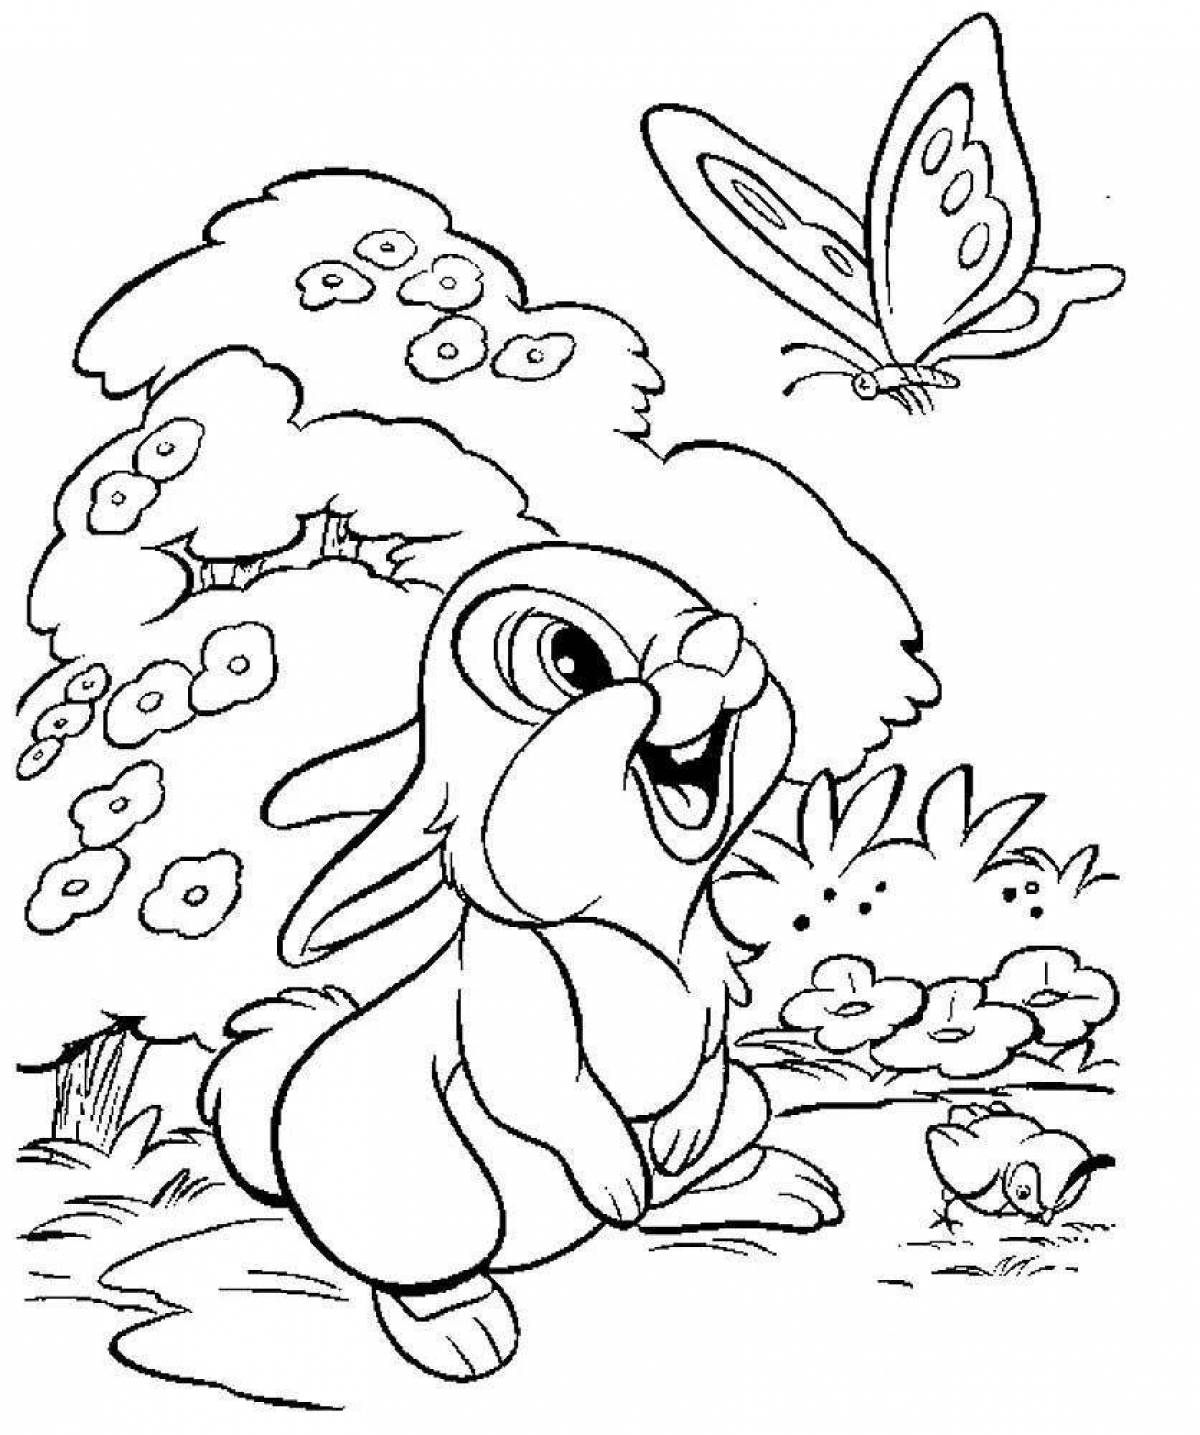 Playful bambi hare coloring page